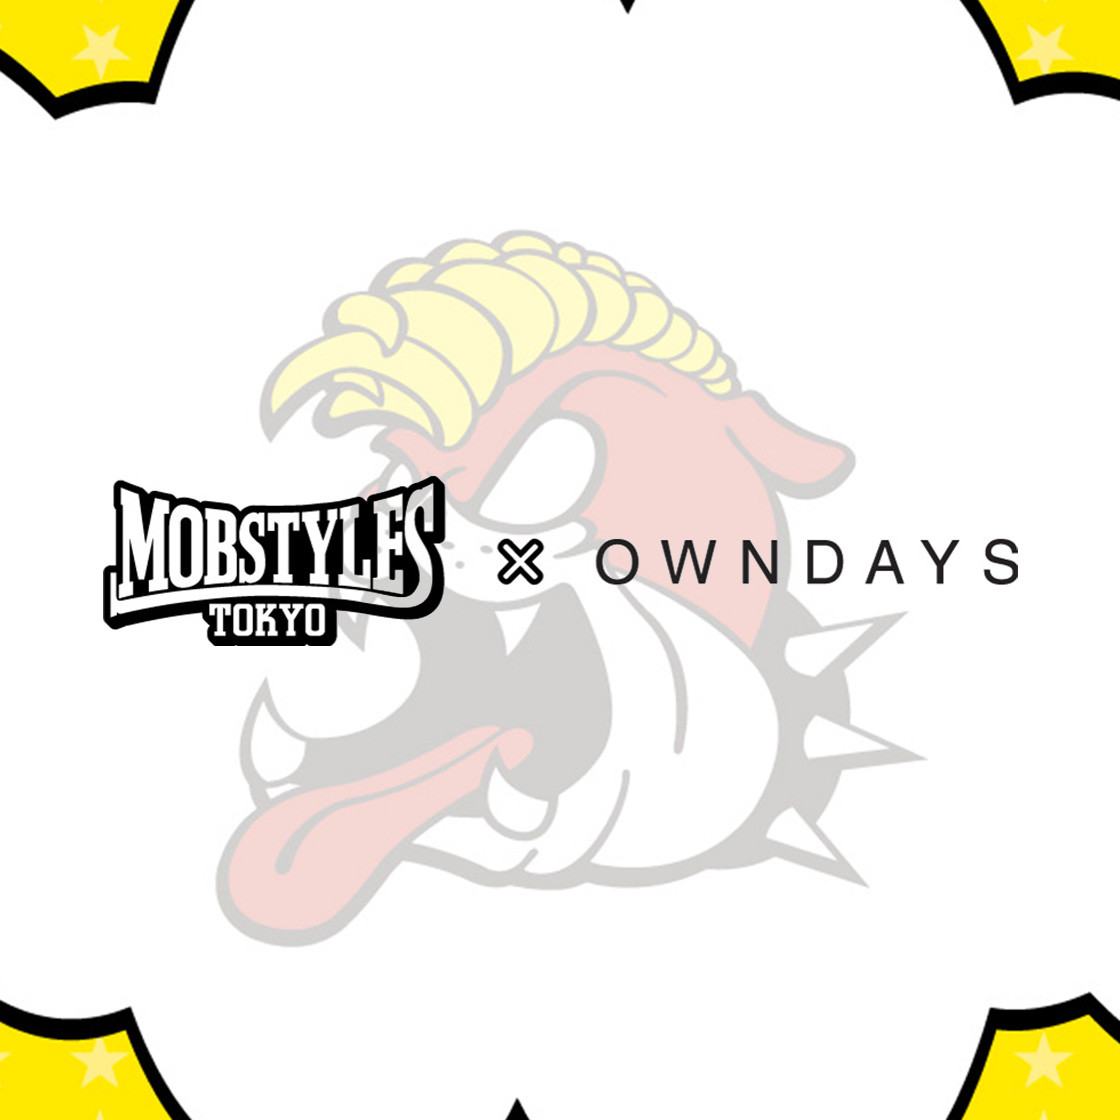 MOBSTYLES x OWNDAYS